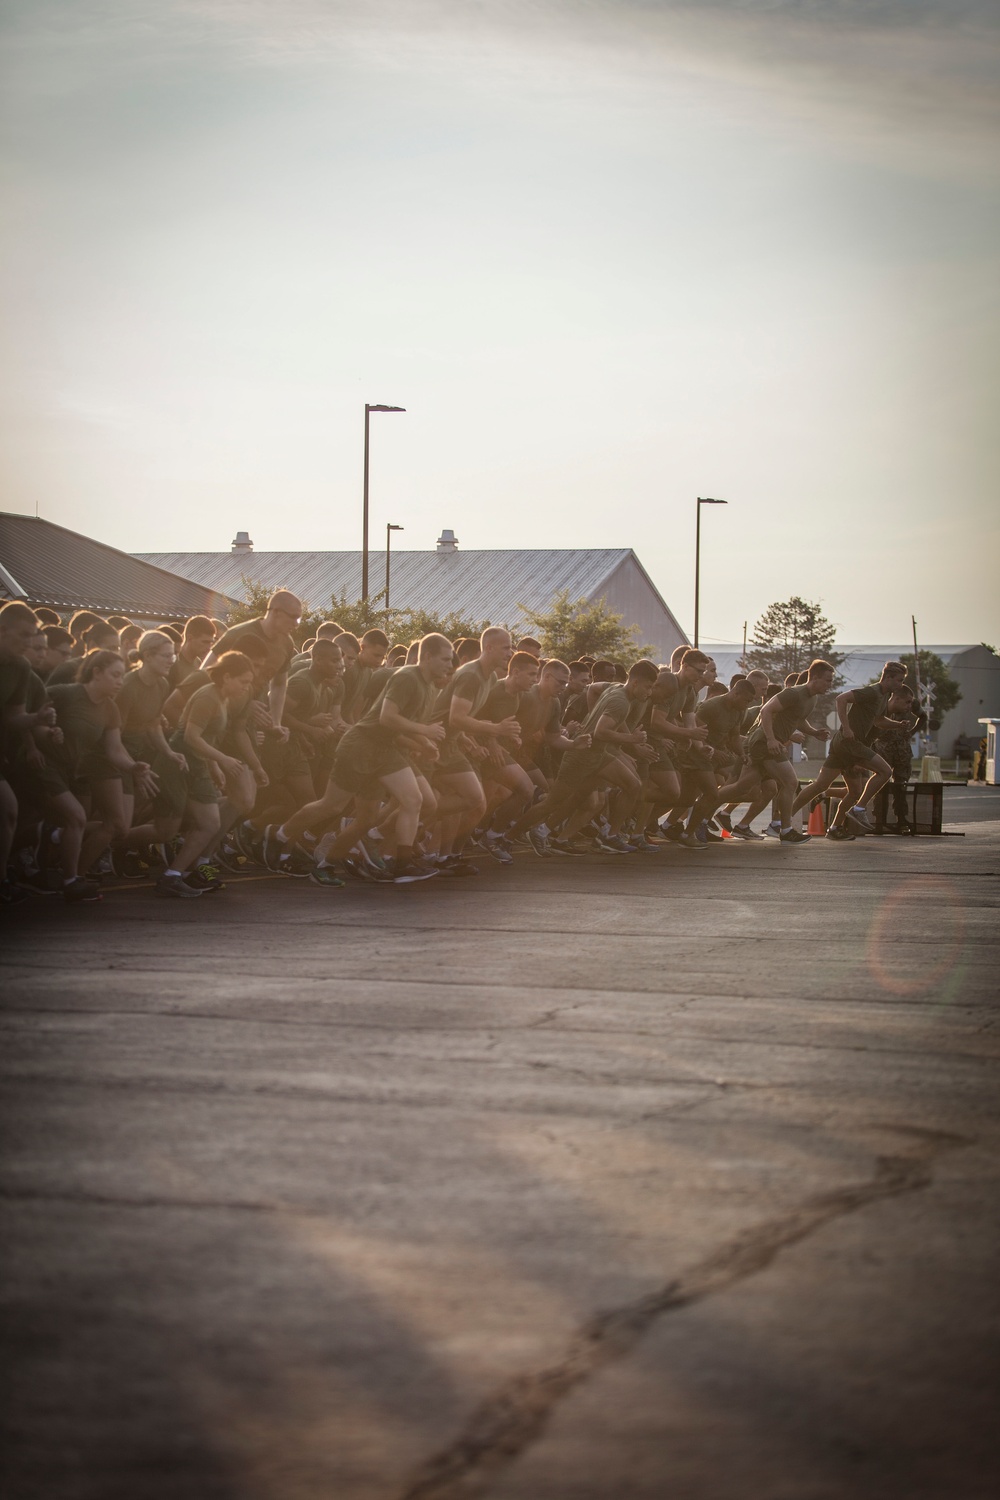 Marine Corps officer candidates run the Physical Fitness Test